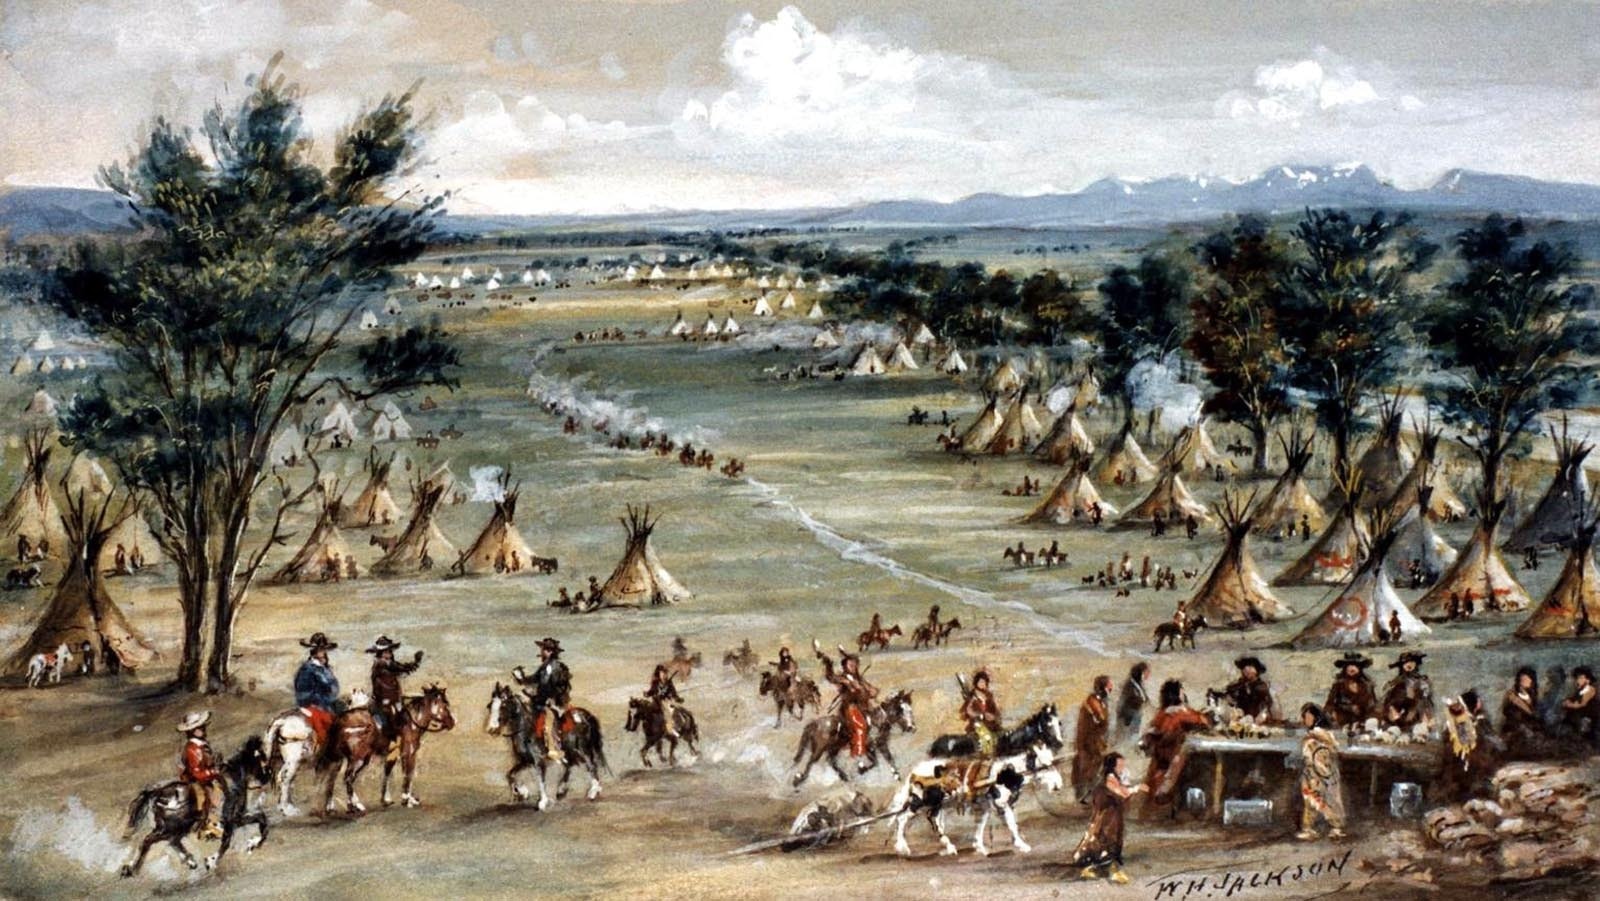 "Green River Rendezvous" by William Henry Jackson.